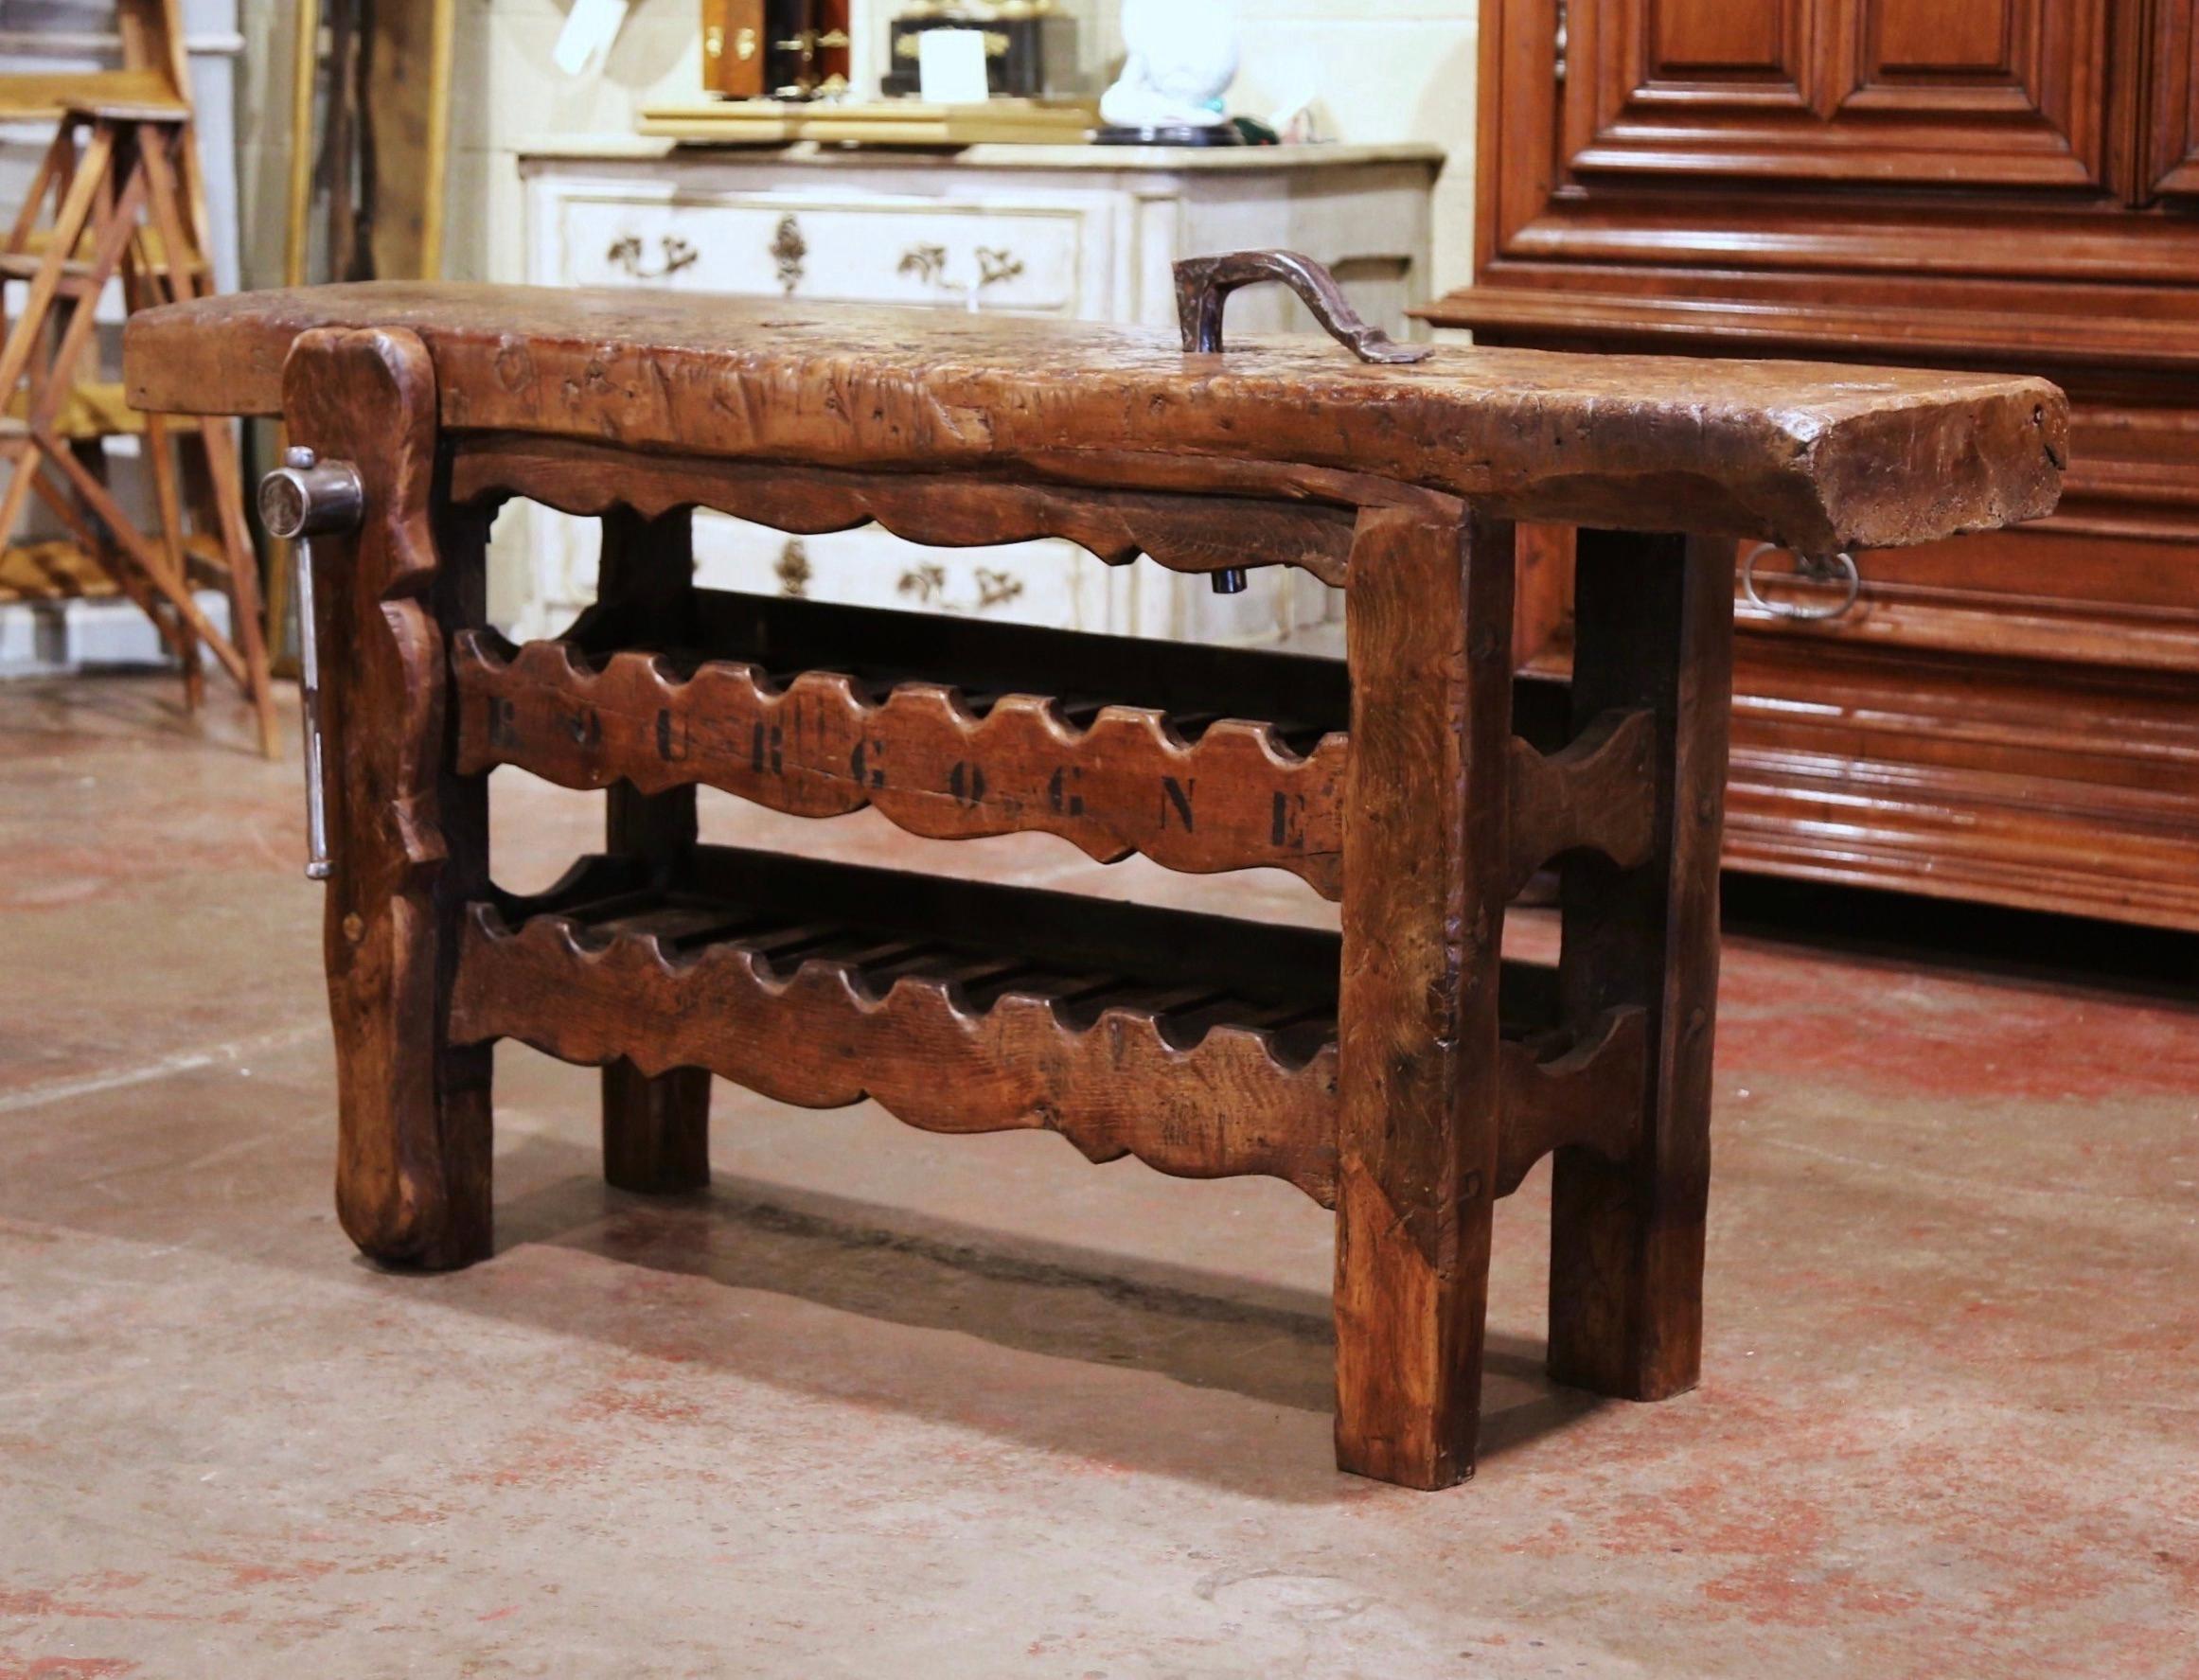 Hand-Carved 19th Century French Oak Carpenter Press Table with 18 Bottles Storage Rack